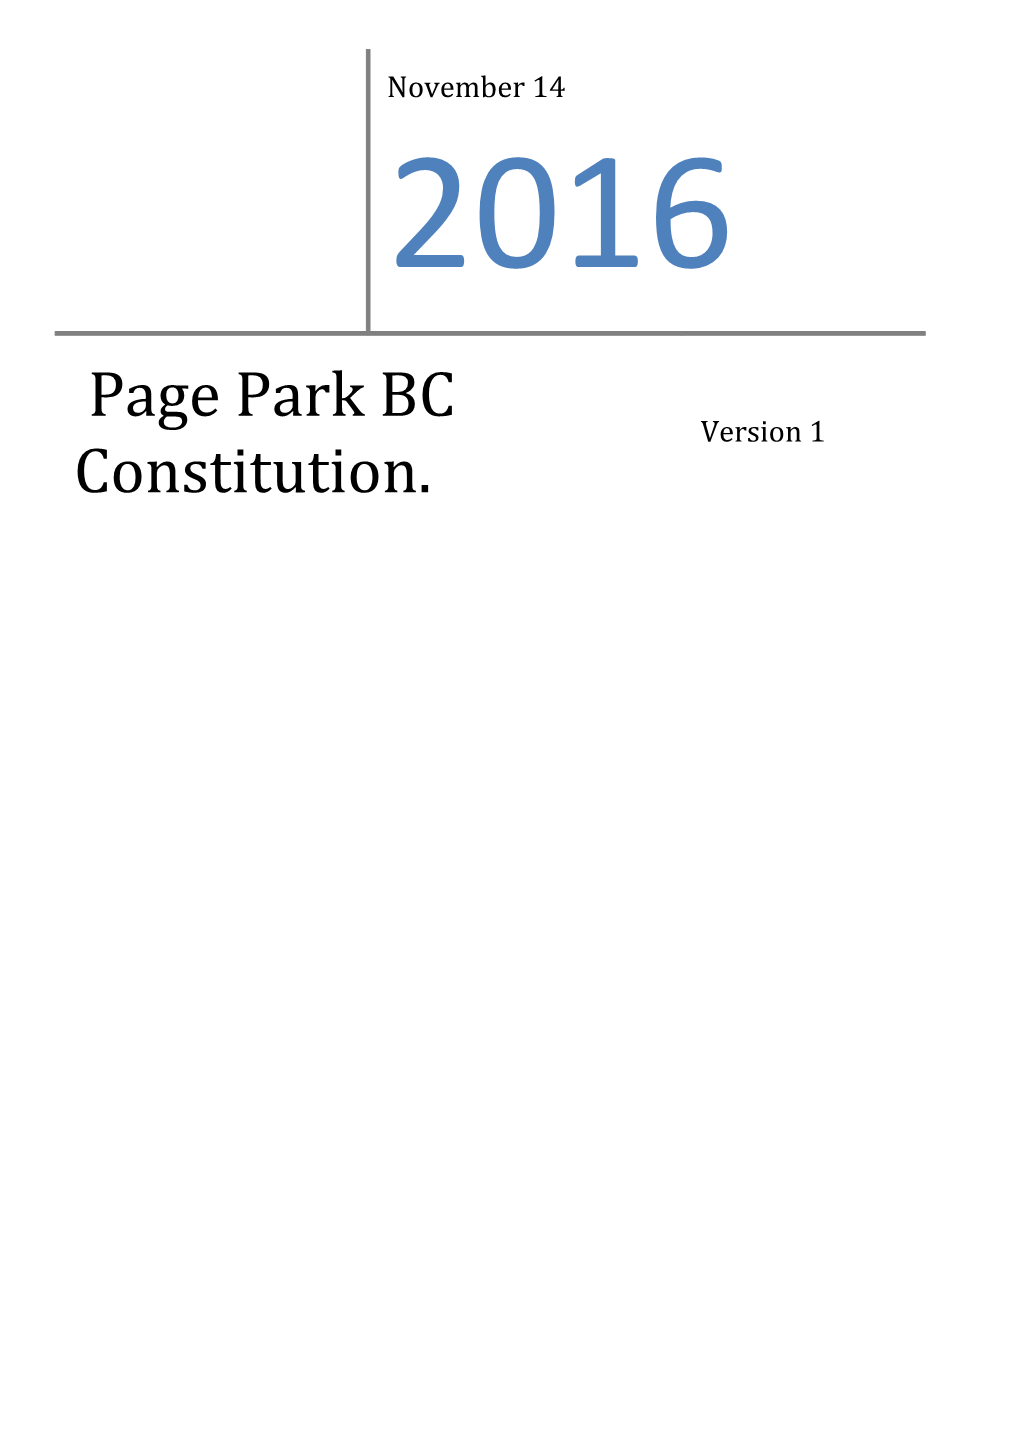 Page Park BC Constitution Version 1 Adopted 14Th November 2016